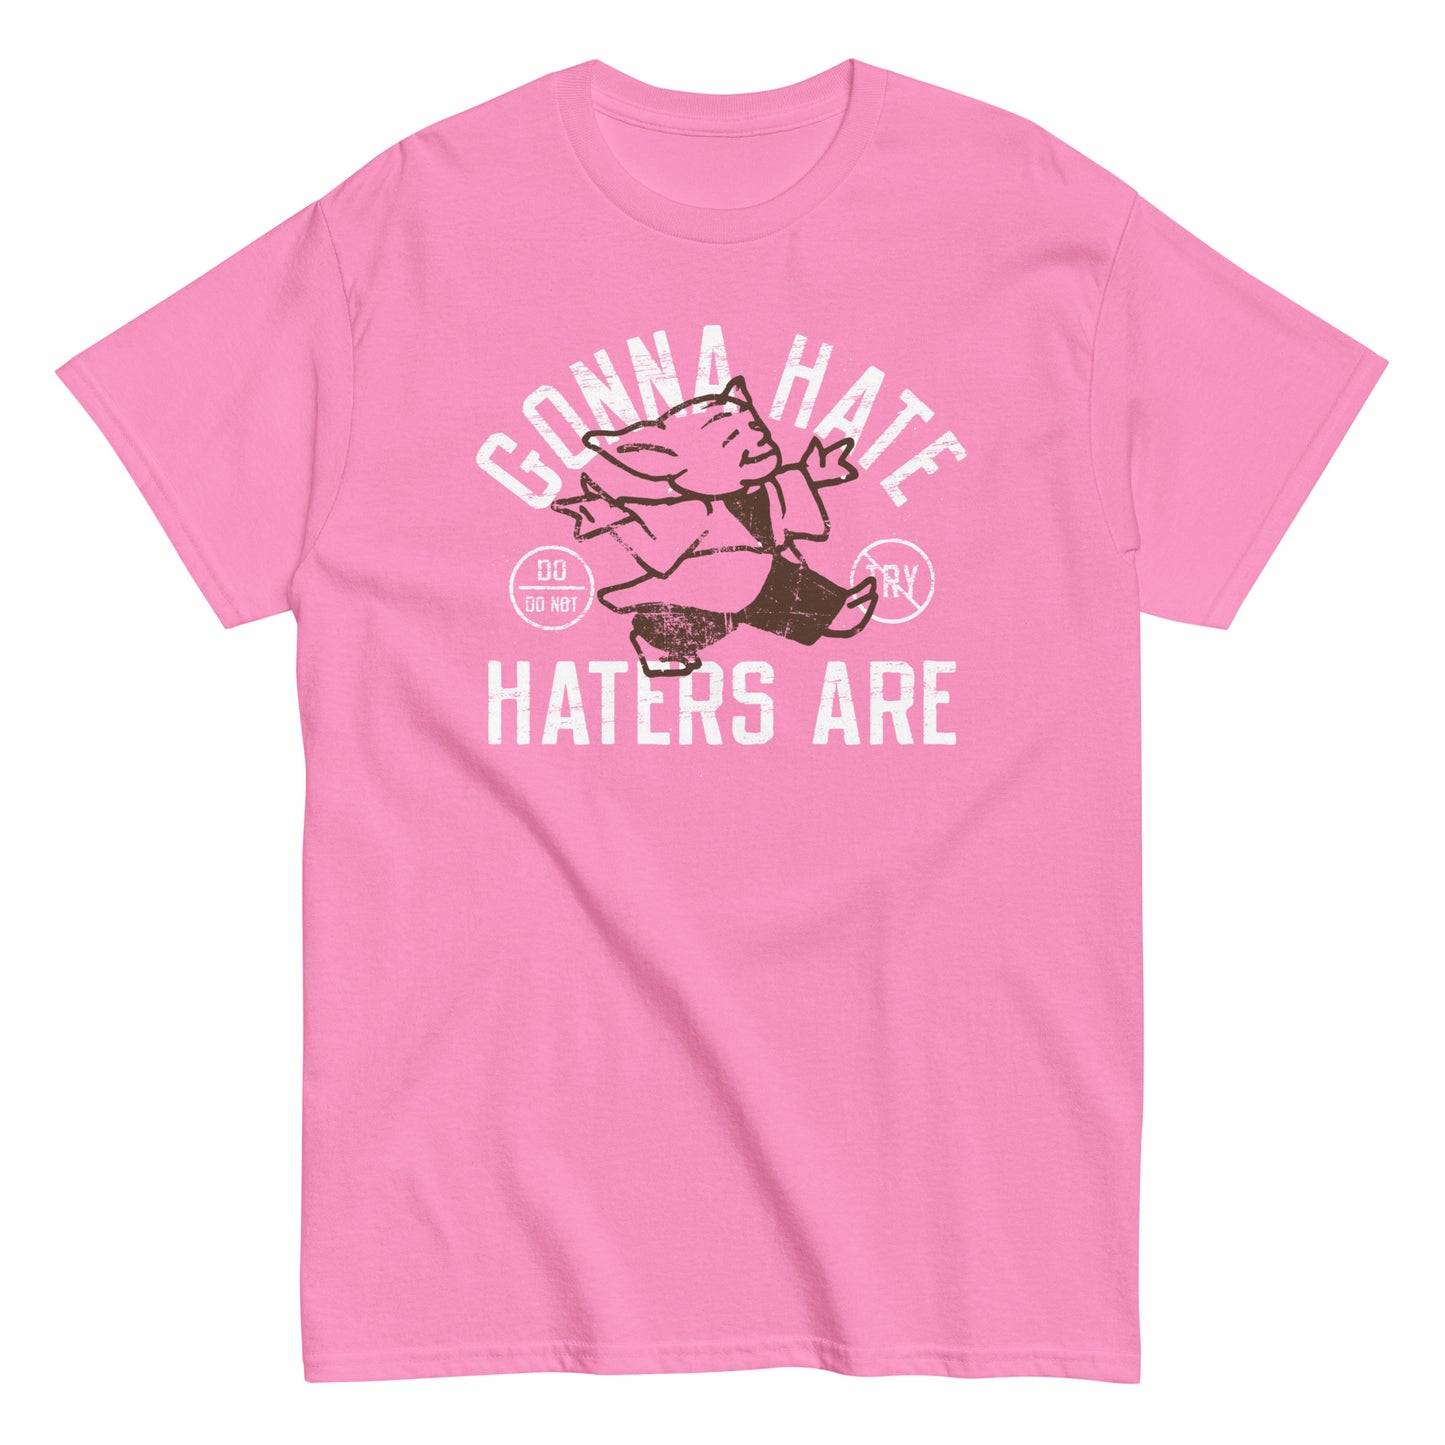 Gonna Hate Haters Are Men's Classic Tee